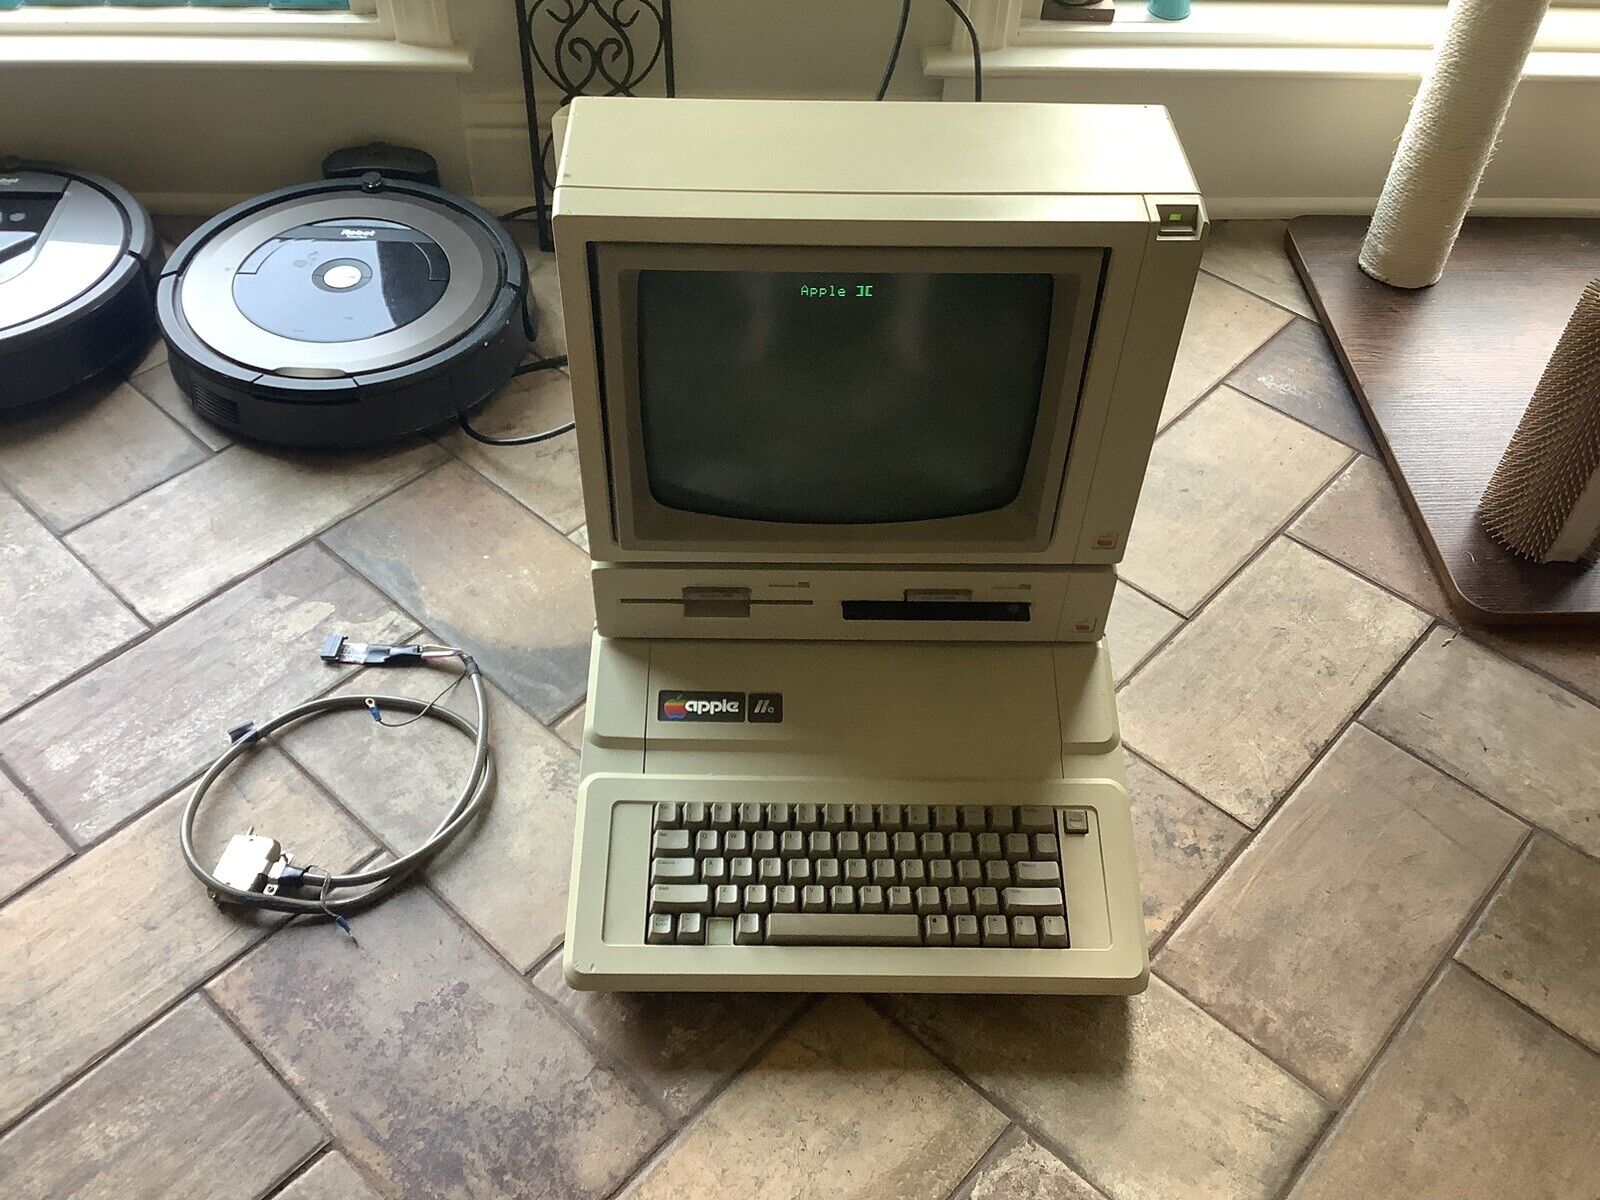 Apple IIe A2S2064 Vintage Personal Computer Duodisk Monitor Tested